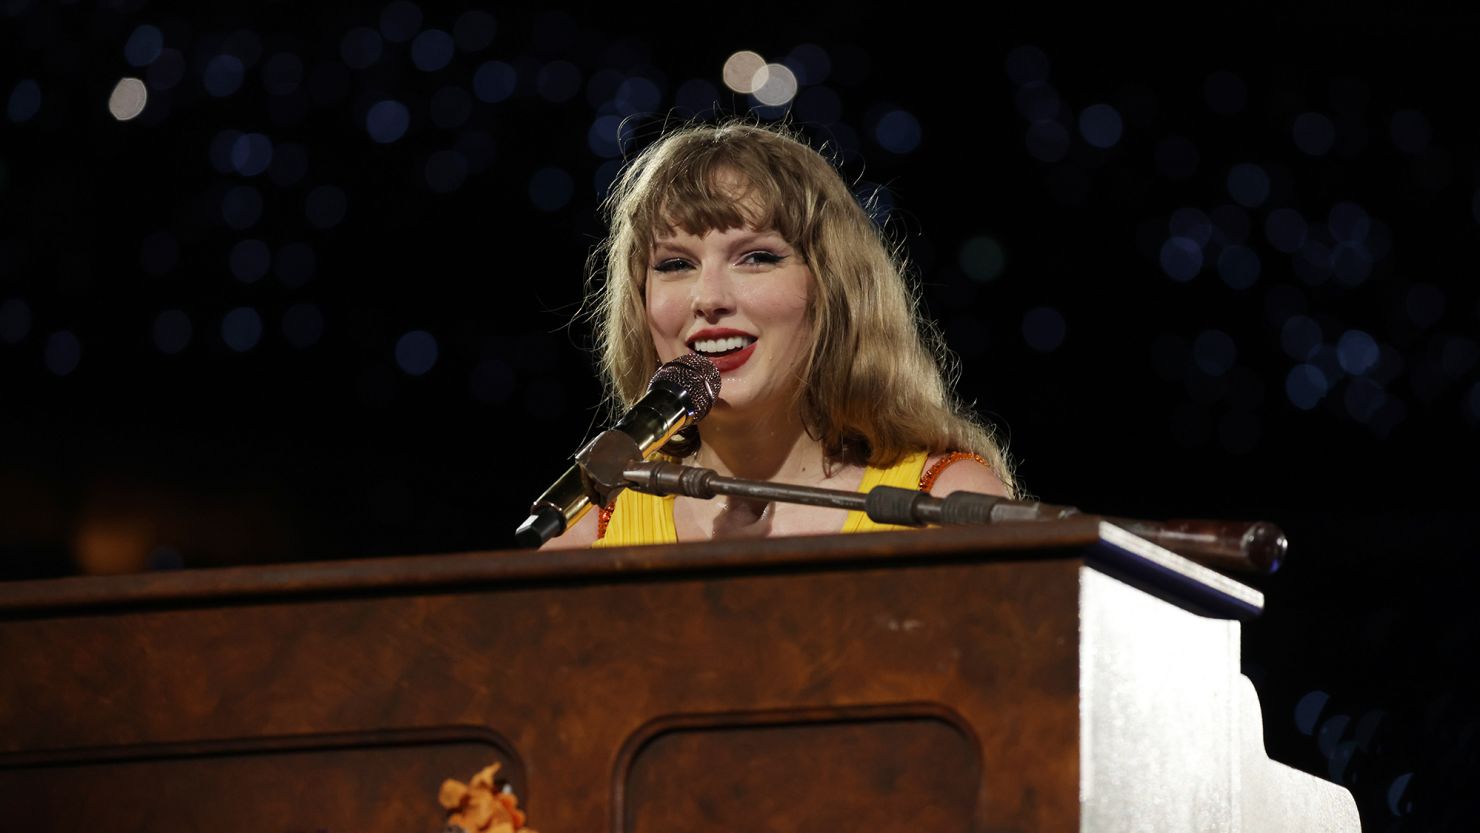 Taylor Swift performing in March 2.